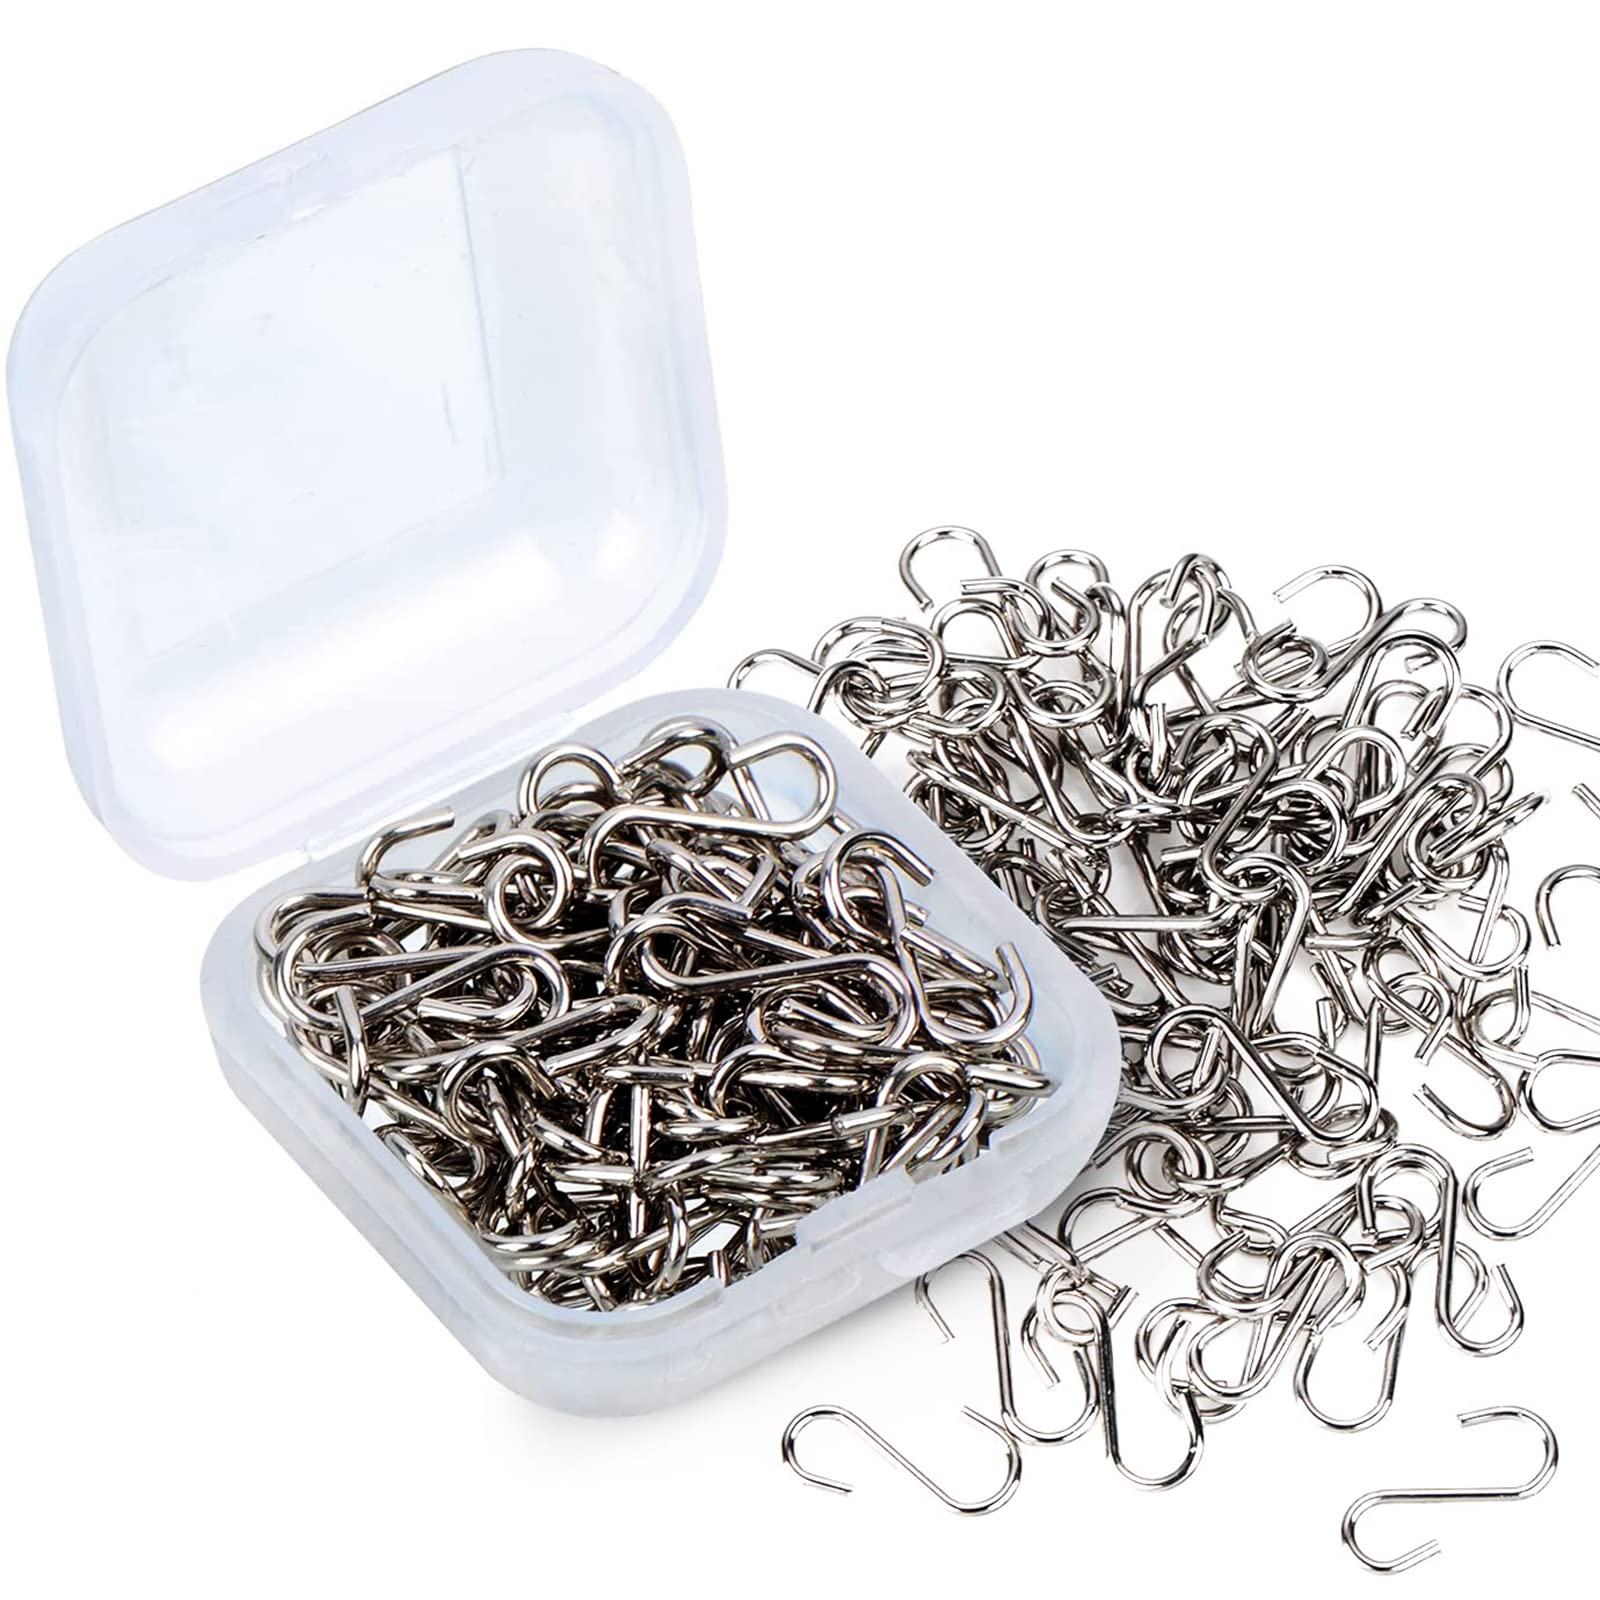 Shappy 100 Pieces 14 x 6 mm/ 0.55 x 0.24 Inch Mini S Hooks Connectors  S-Shaped Wire Hook with Storage Box for DIY Crafts Hanging Jewelry Key  Chain Tags